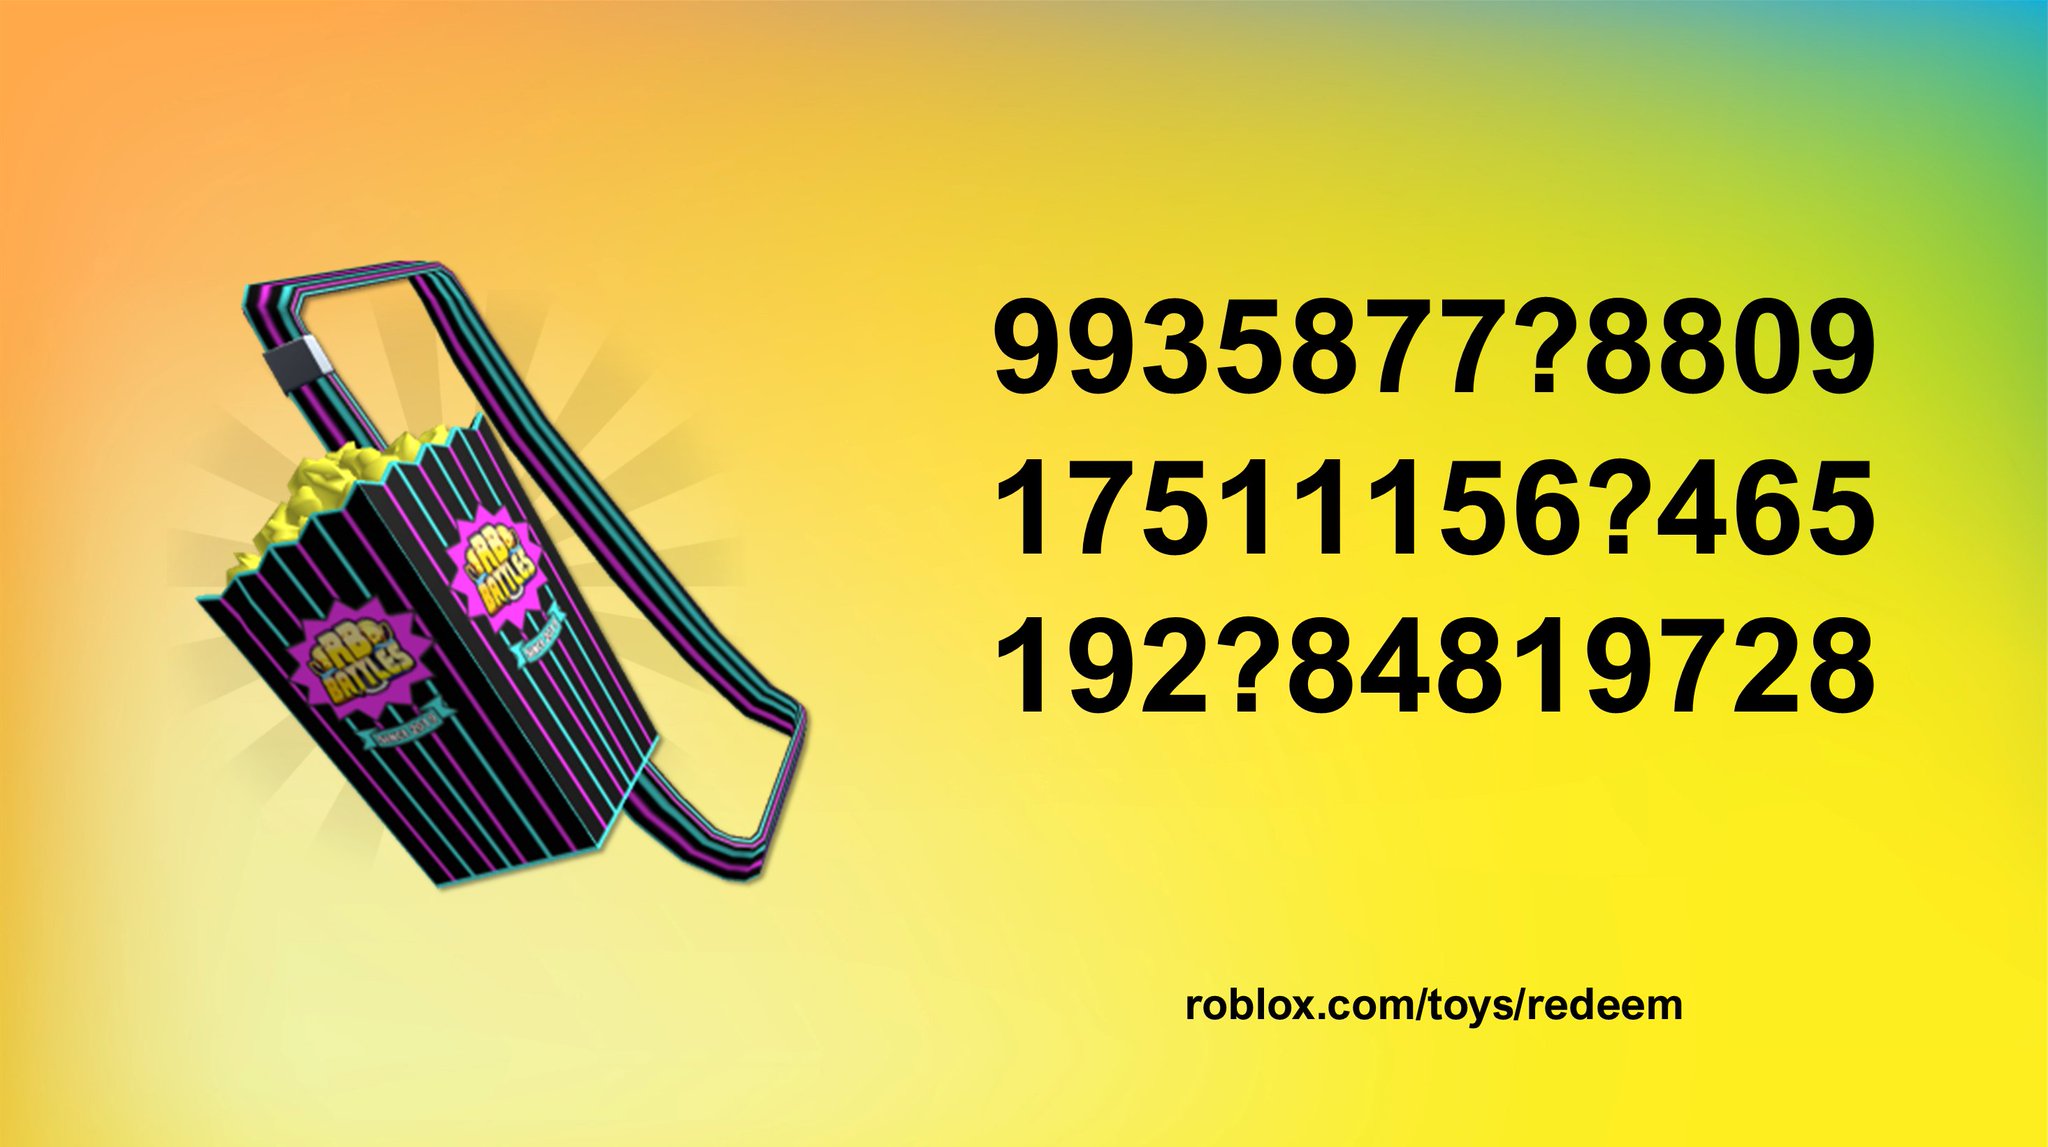 Bloxy News On Twitter Here Are A Few One Time Use Rbbattles Popcorn Bucket Codes If You Can Find The Missing Number In Each Code The Item Is Yours Redeem At Https T Co Mkc7gqa4jk - roblox toys redeem my code